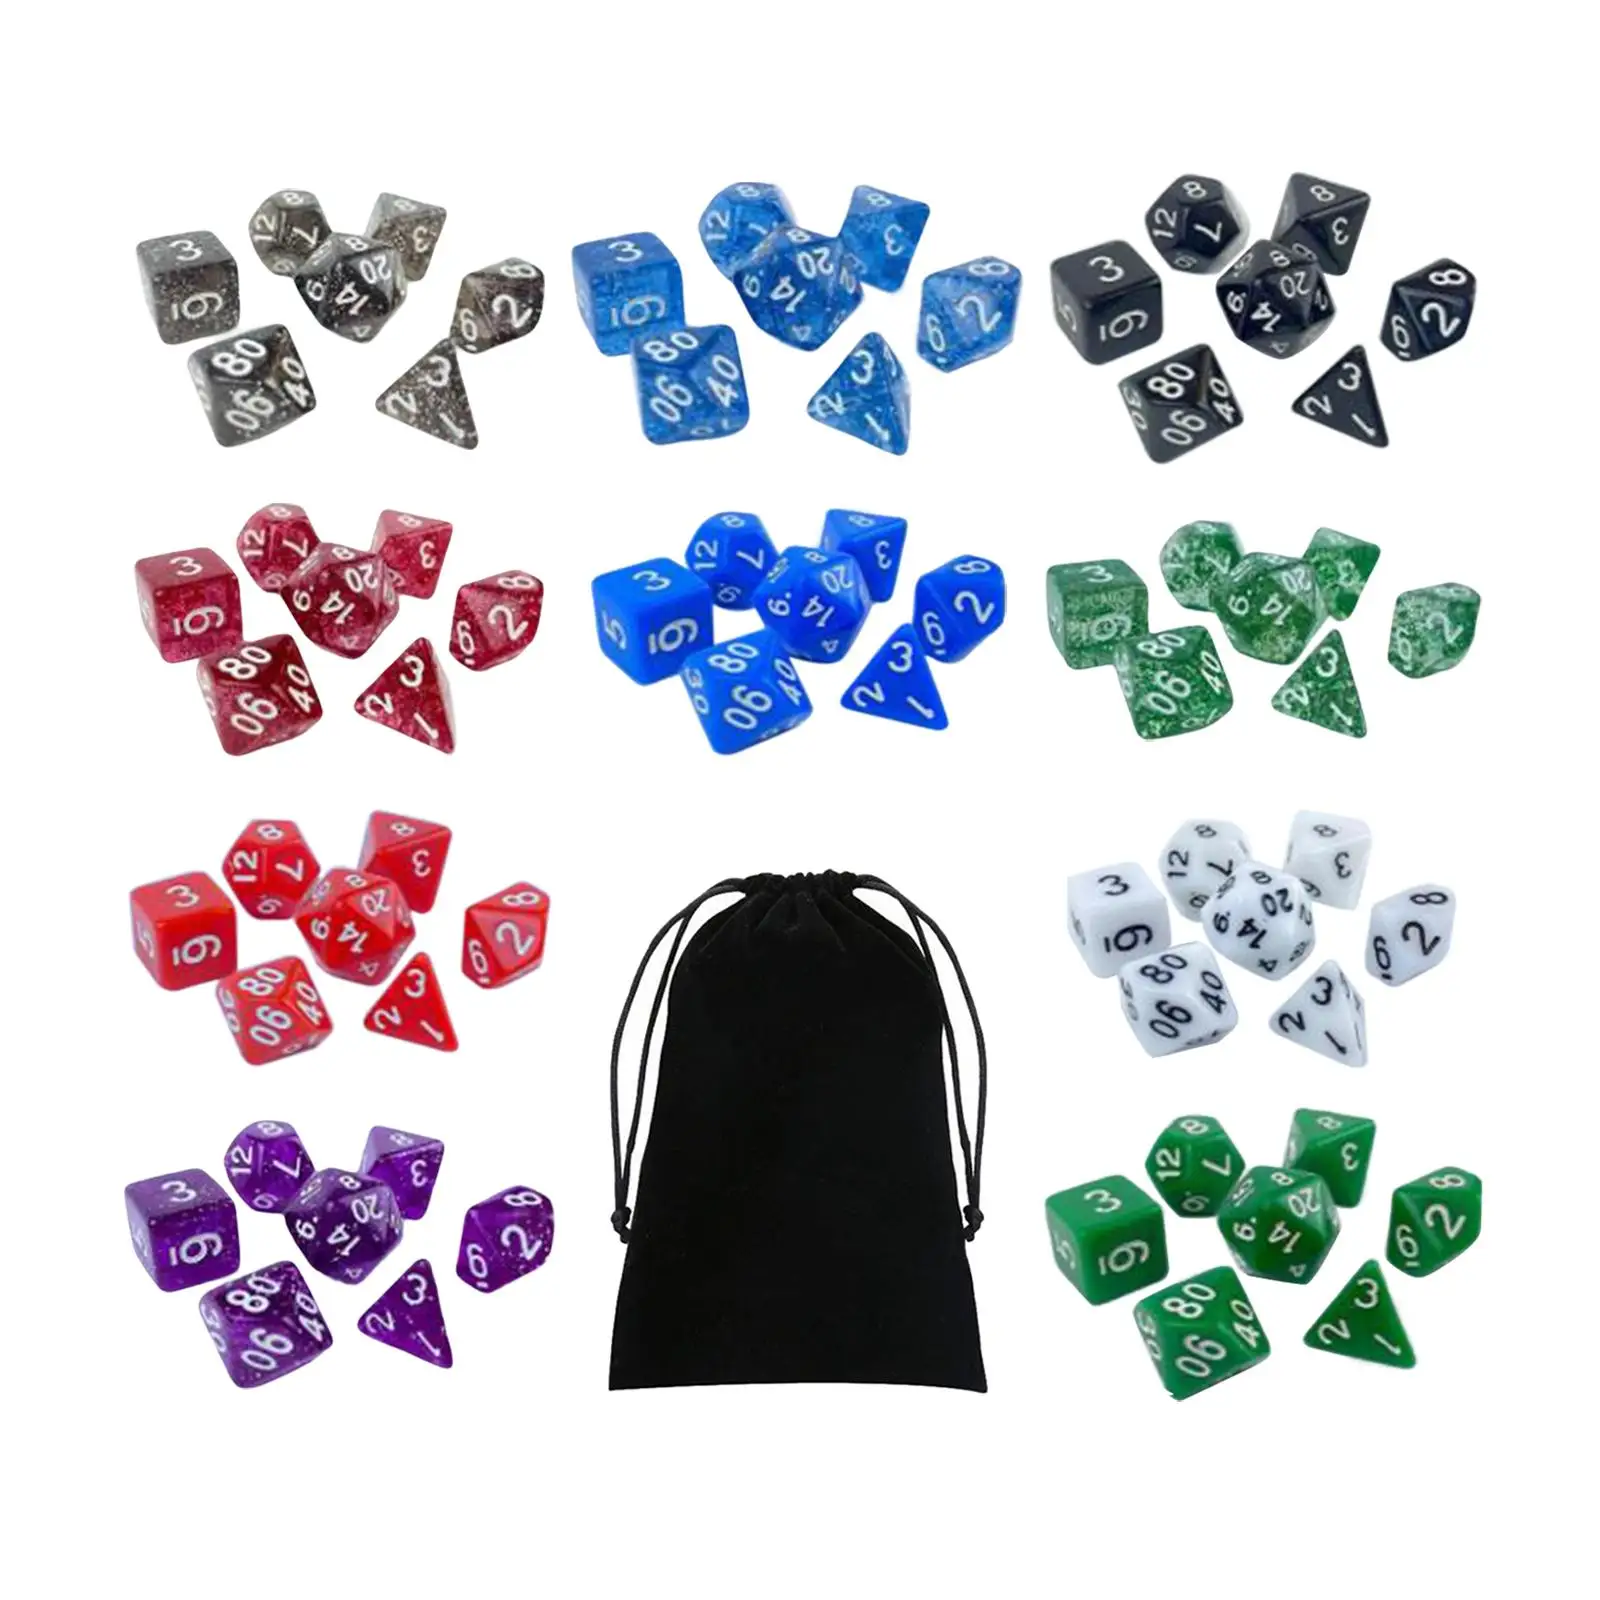 70x Acrylic Polyhedral Dice Entertainment Toy Table Games with Storage Bag Game Props Dice Sets Dice for D6 D10 D8 D12 D4